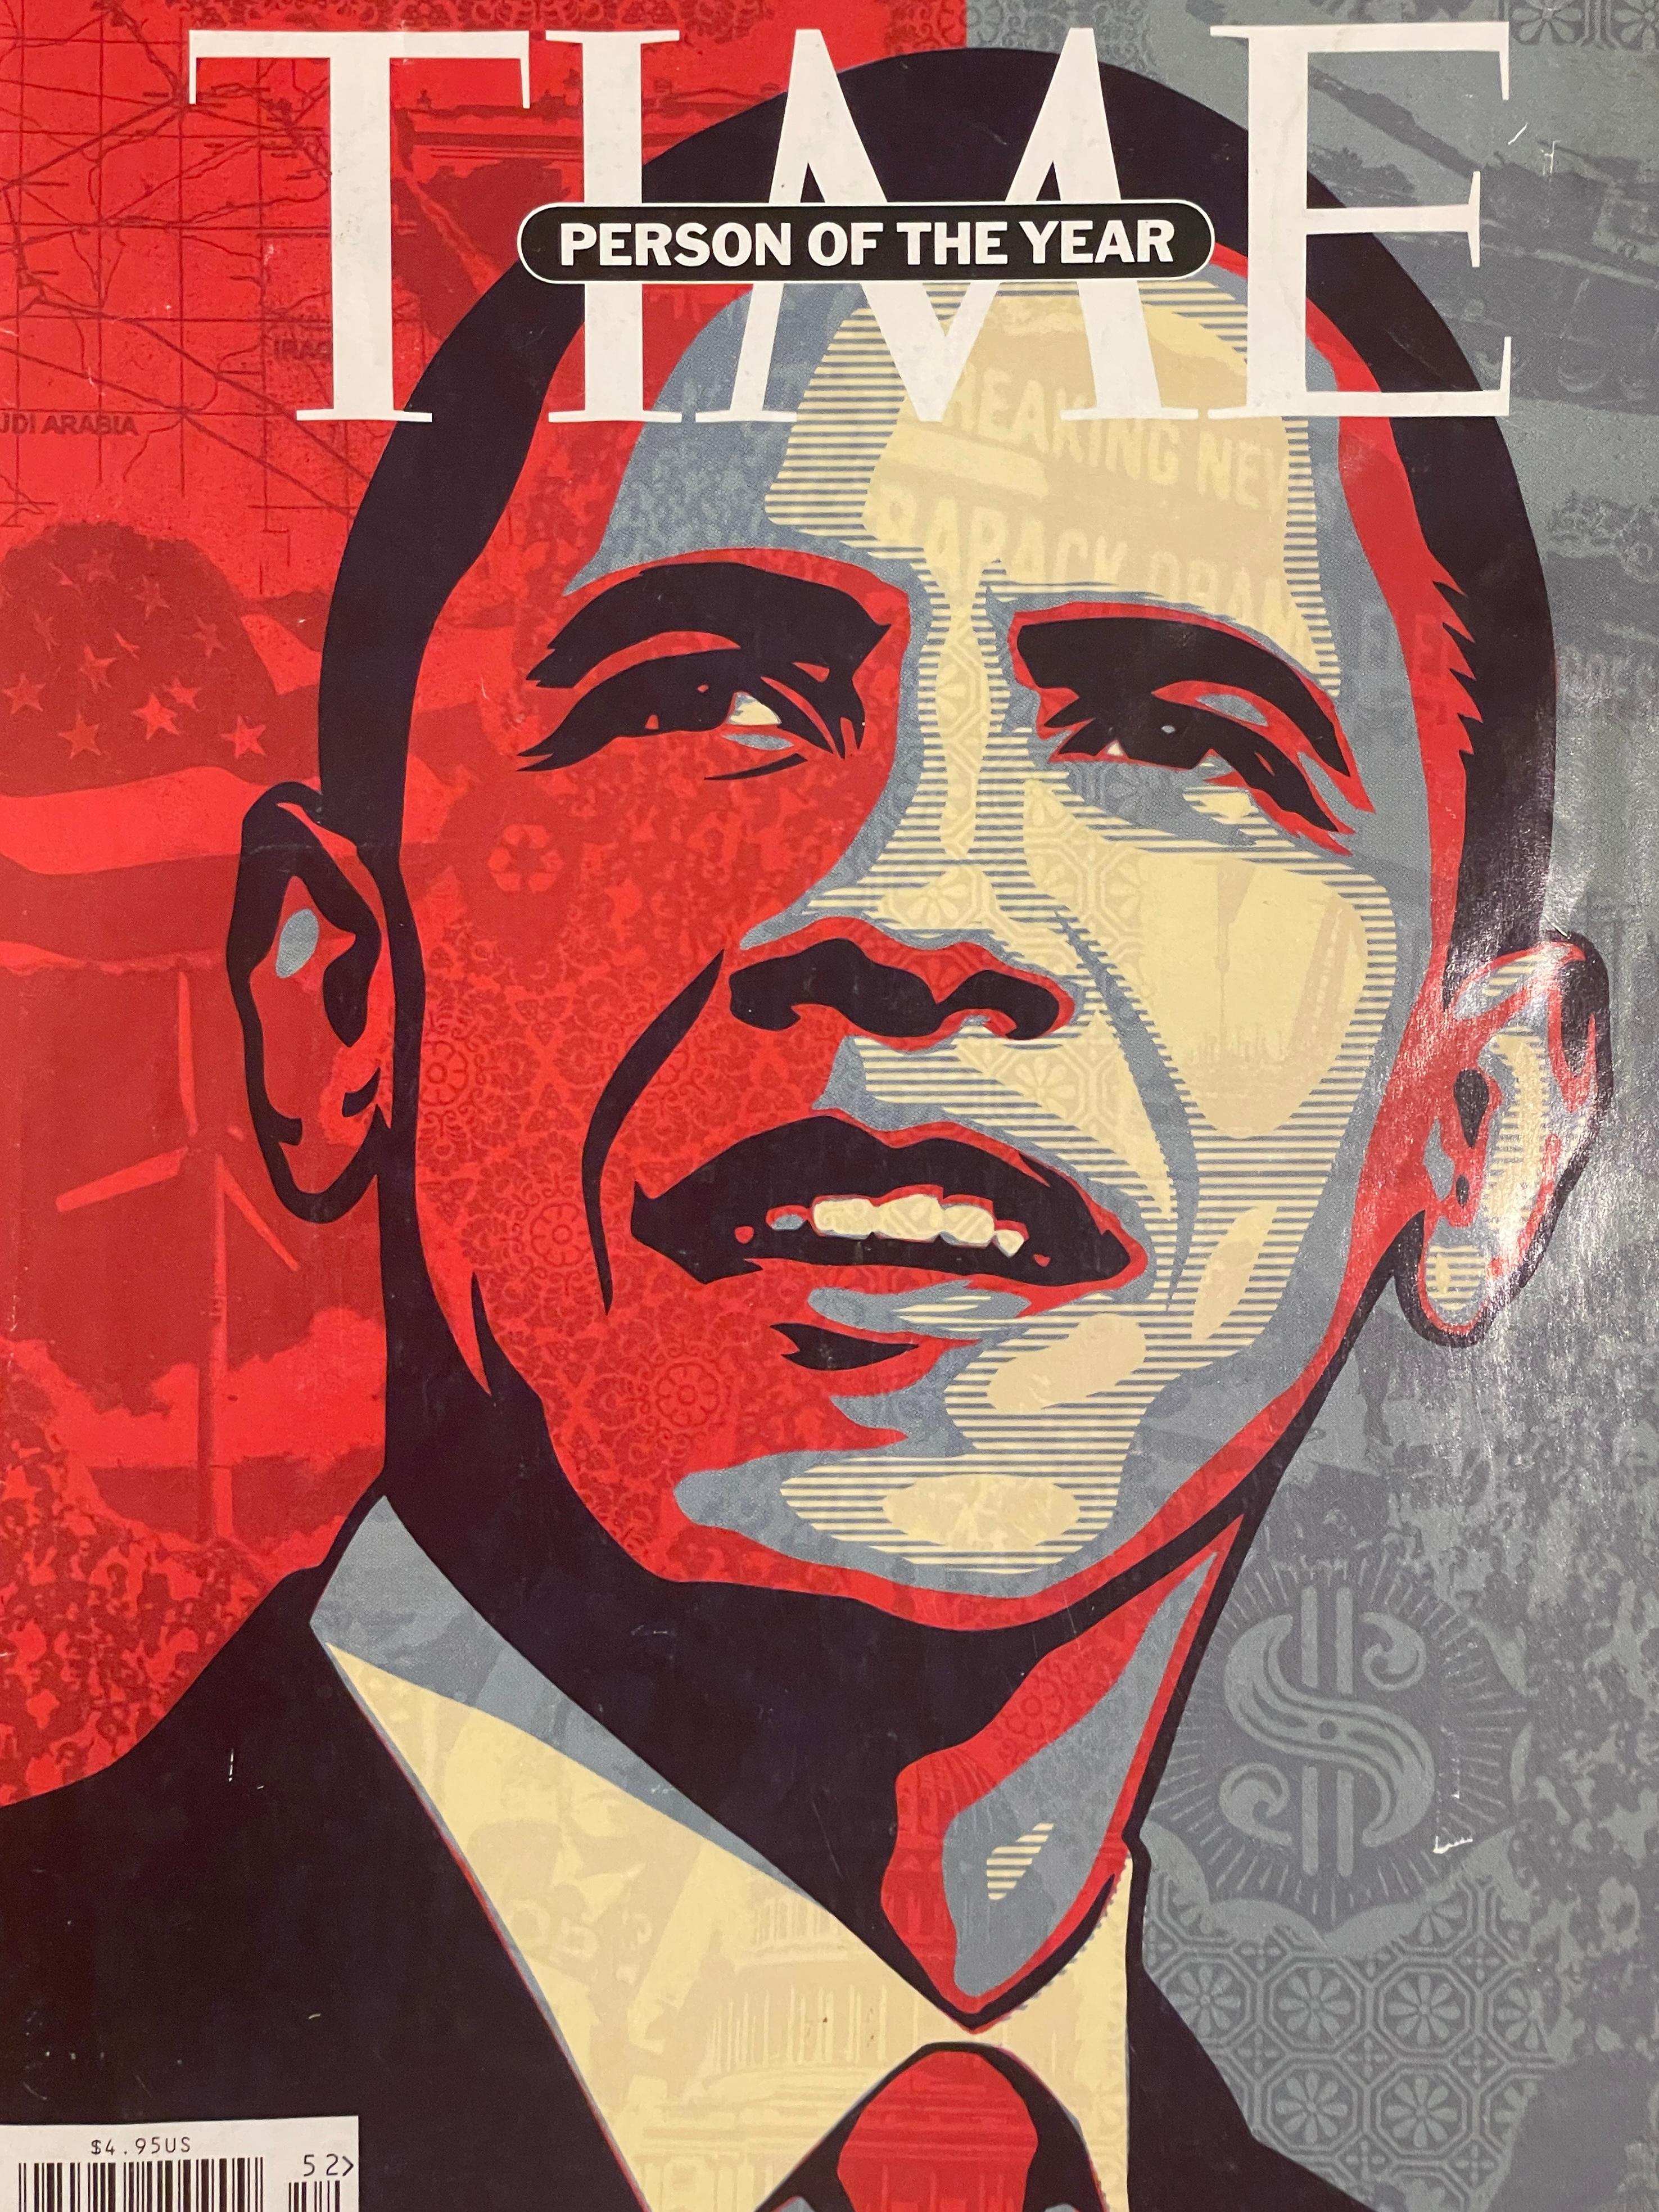 Person Of The Year Barack Obama Time Magazine Cover by Shepard Fairey 2008 2